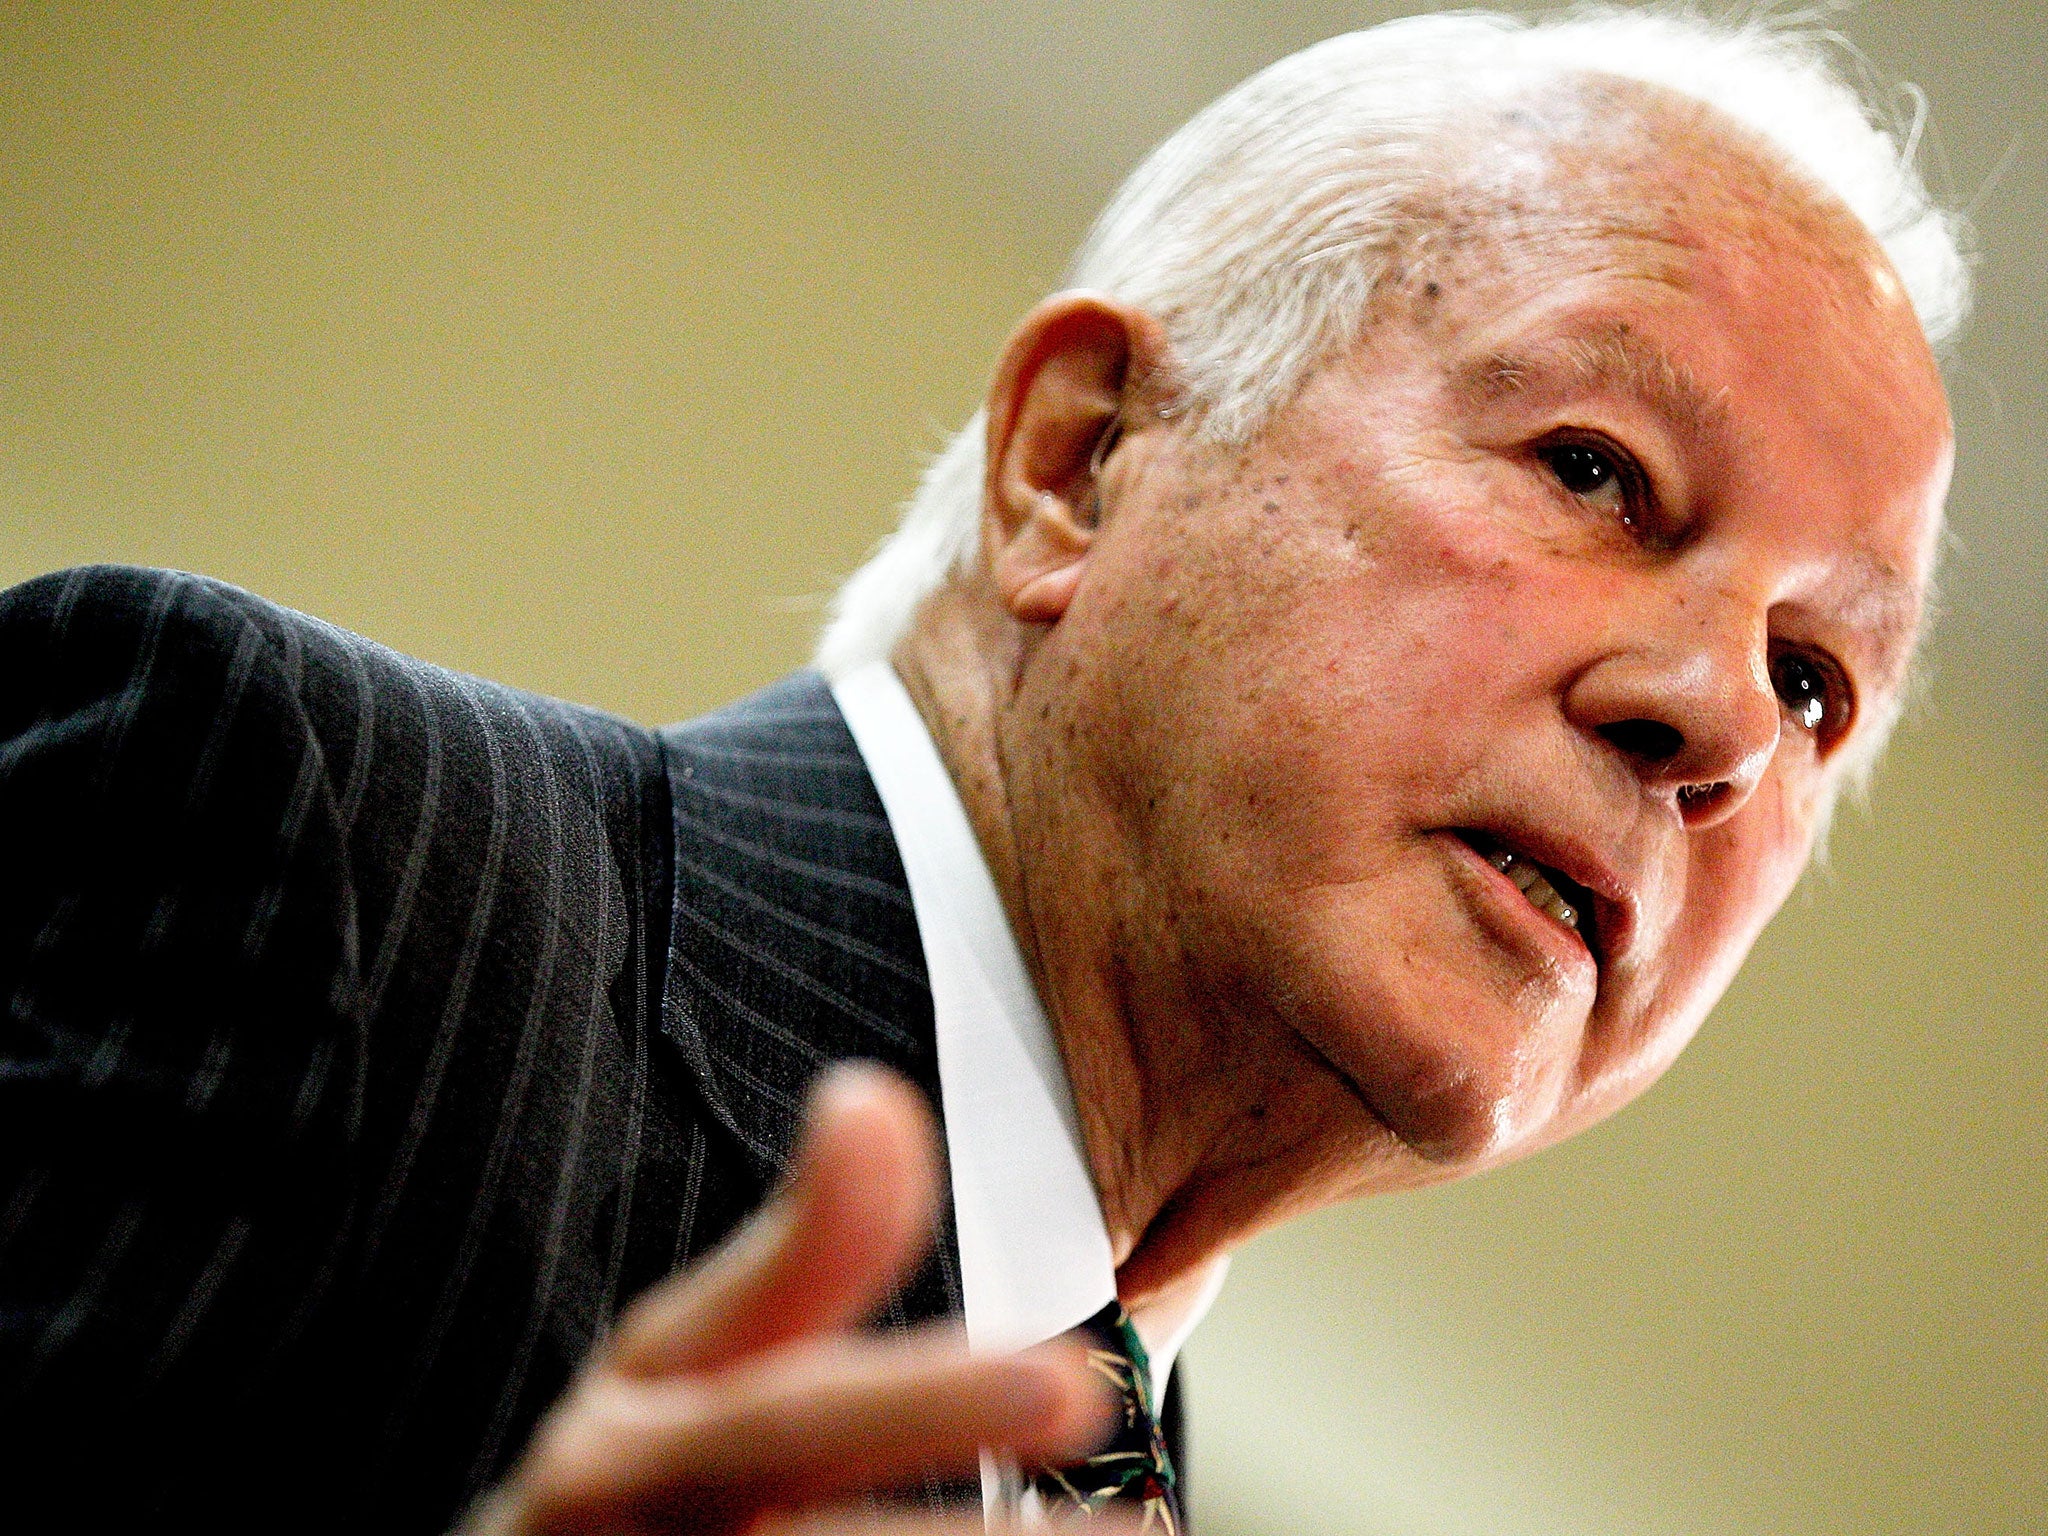 Edwin Edwards married a woman 50 years his junior and had a child upon his
release from prison in 2011